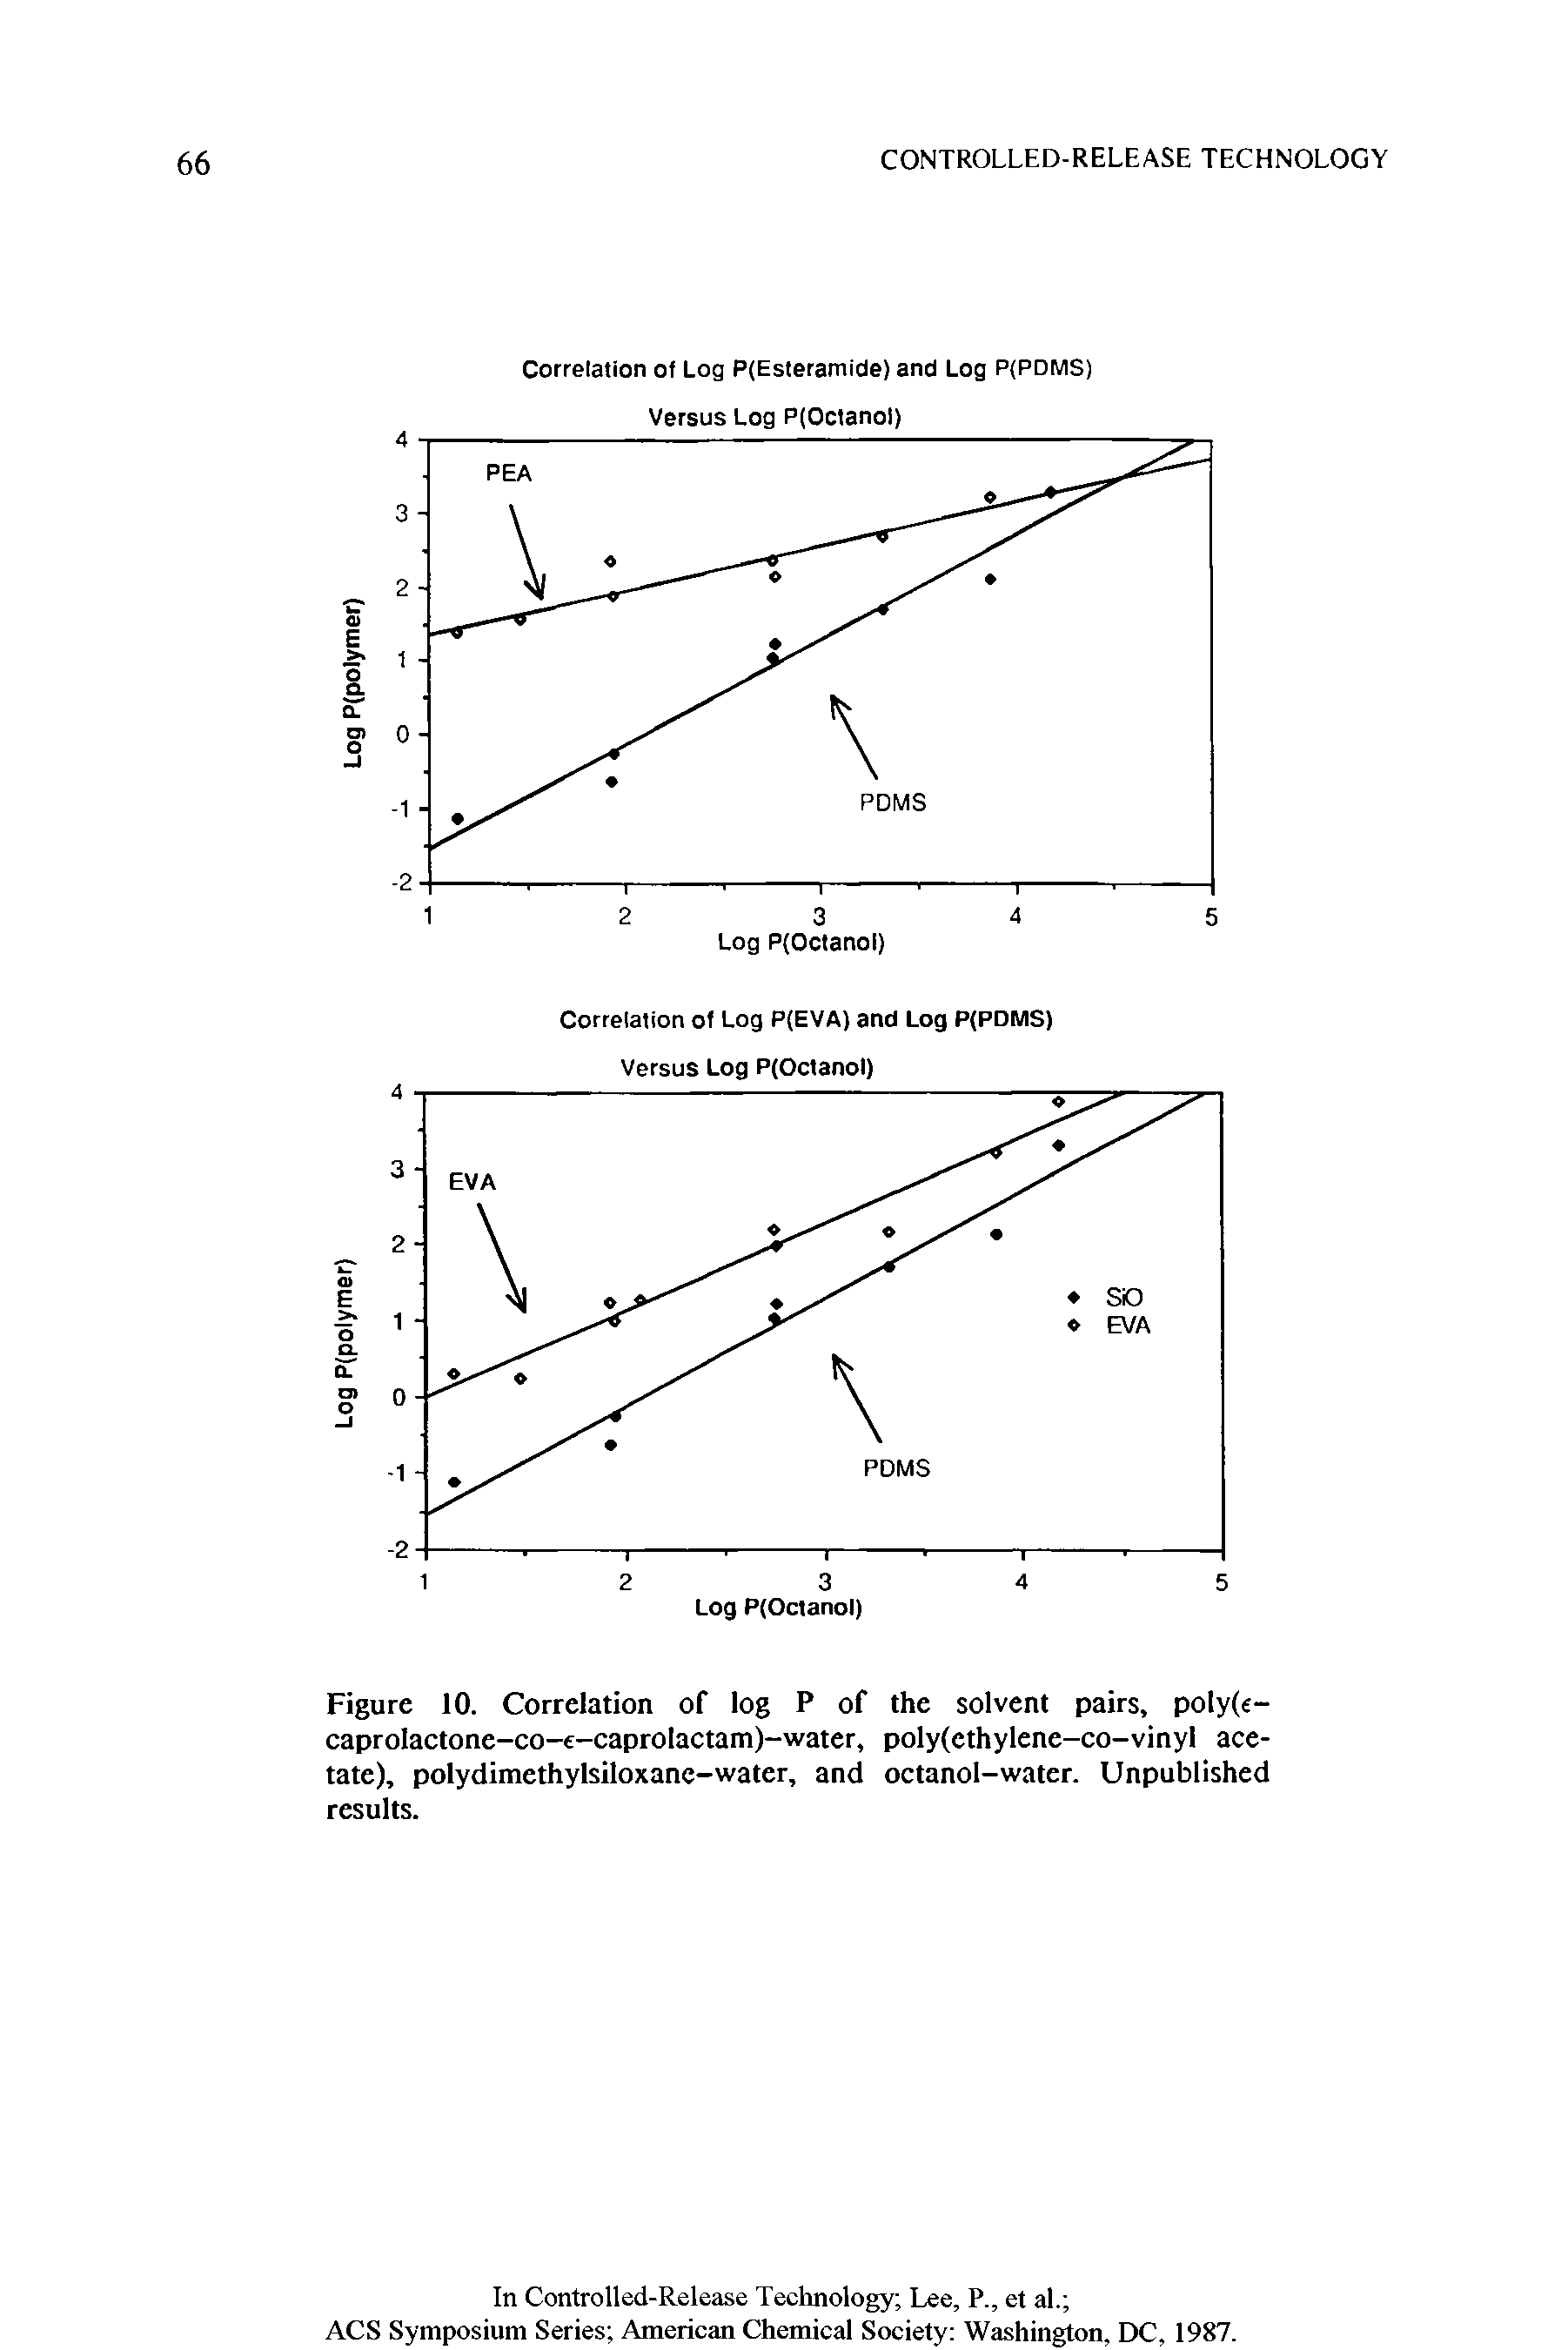 Figure 10. Correlation of log P of the solvent pairs, poly(e-caprolactonc-co-e-caprolactam)-water, poly(ethylene-co-vinyl acetate), polydimethylsiloxane-water, and octanol-water. Unpublished results.